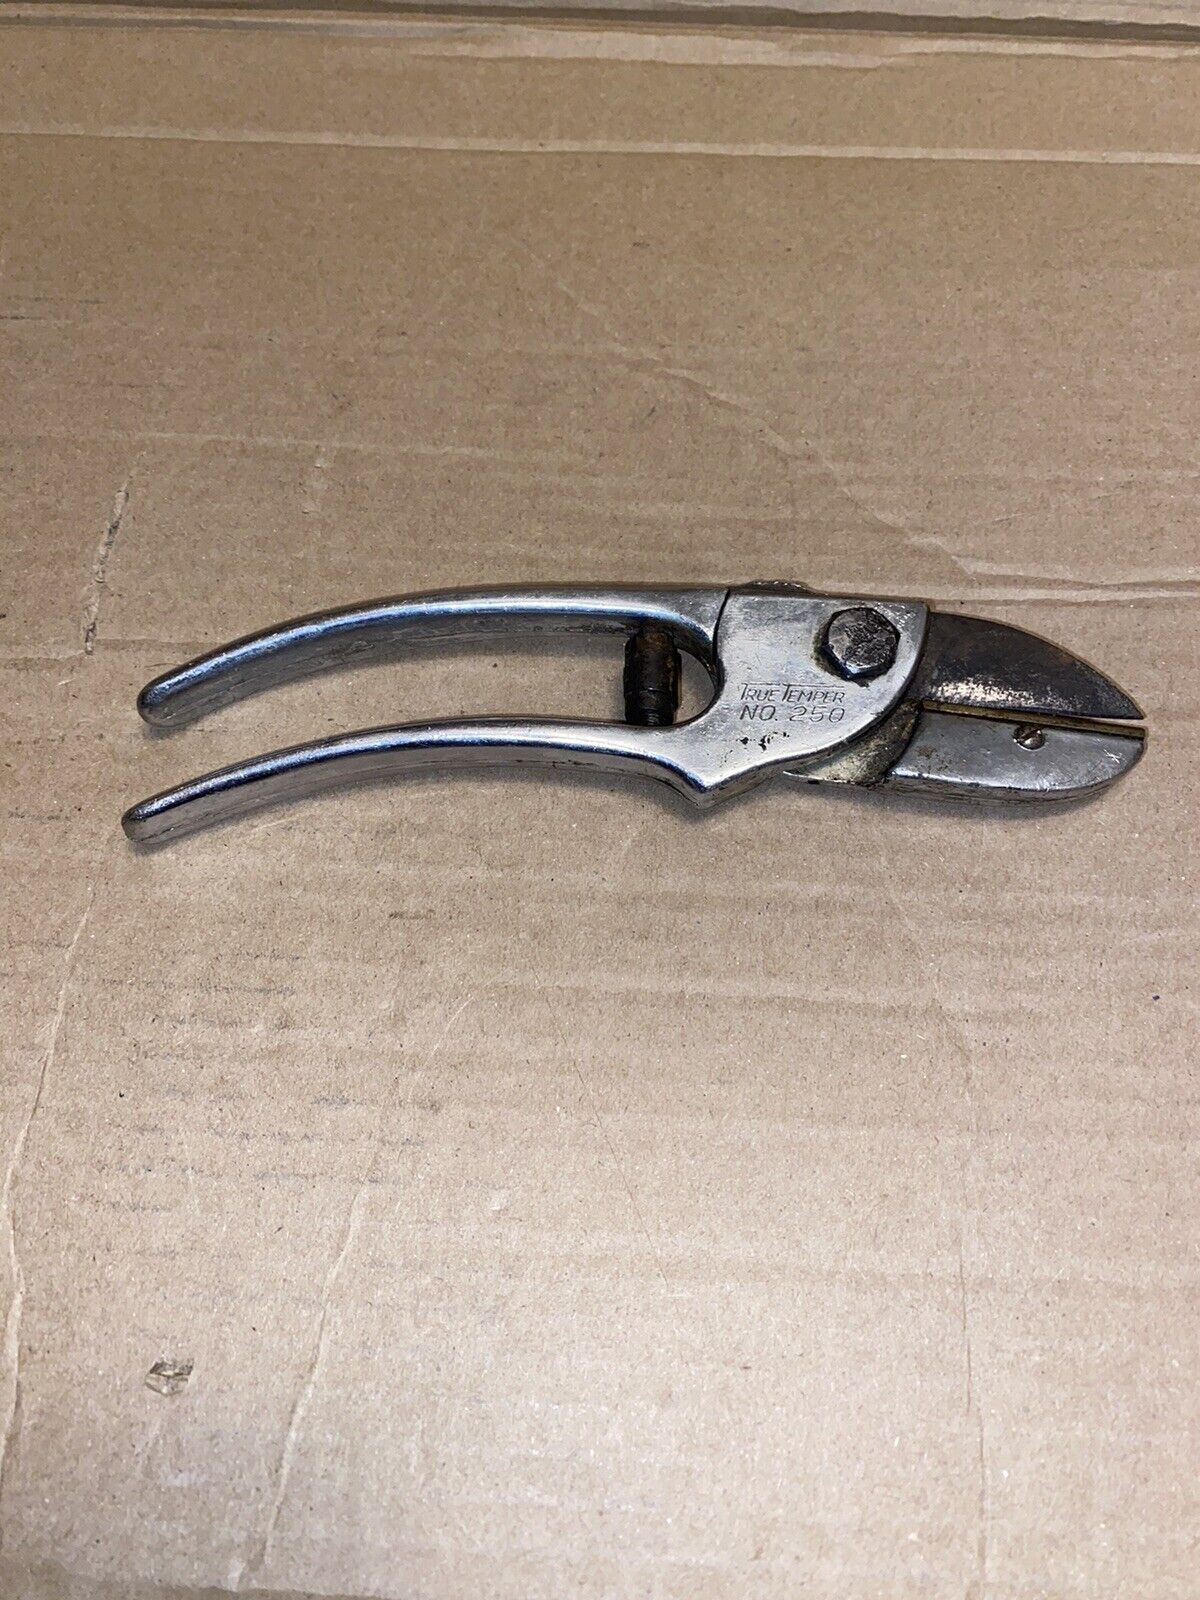 Vintage True Temper Garden Pruning Shears No. 250 Cutters 7.5 Inches